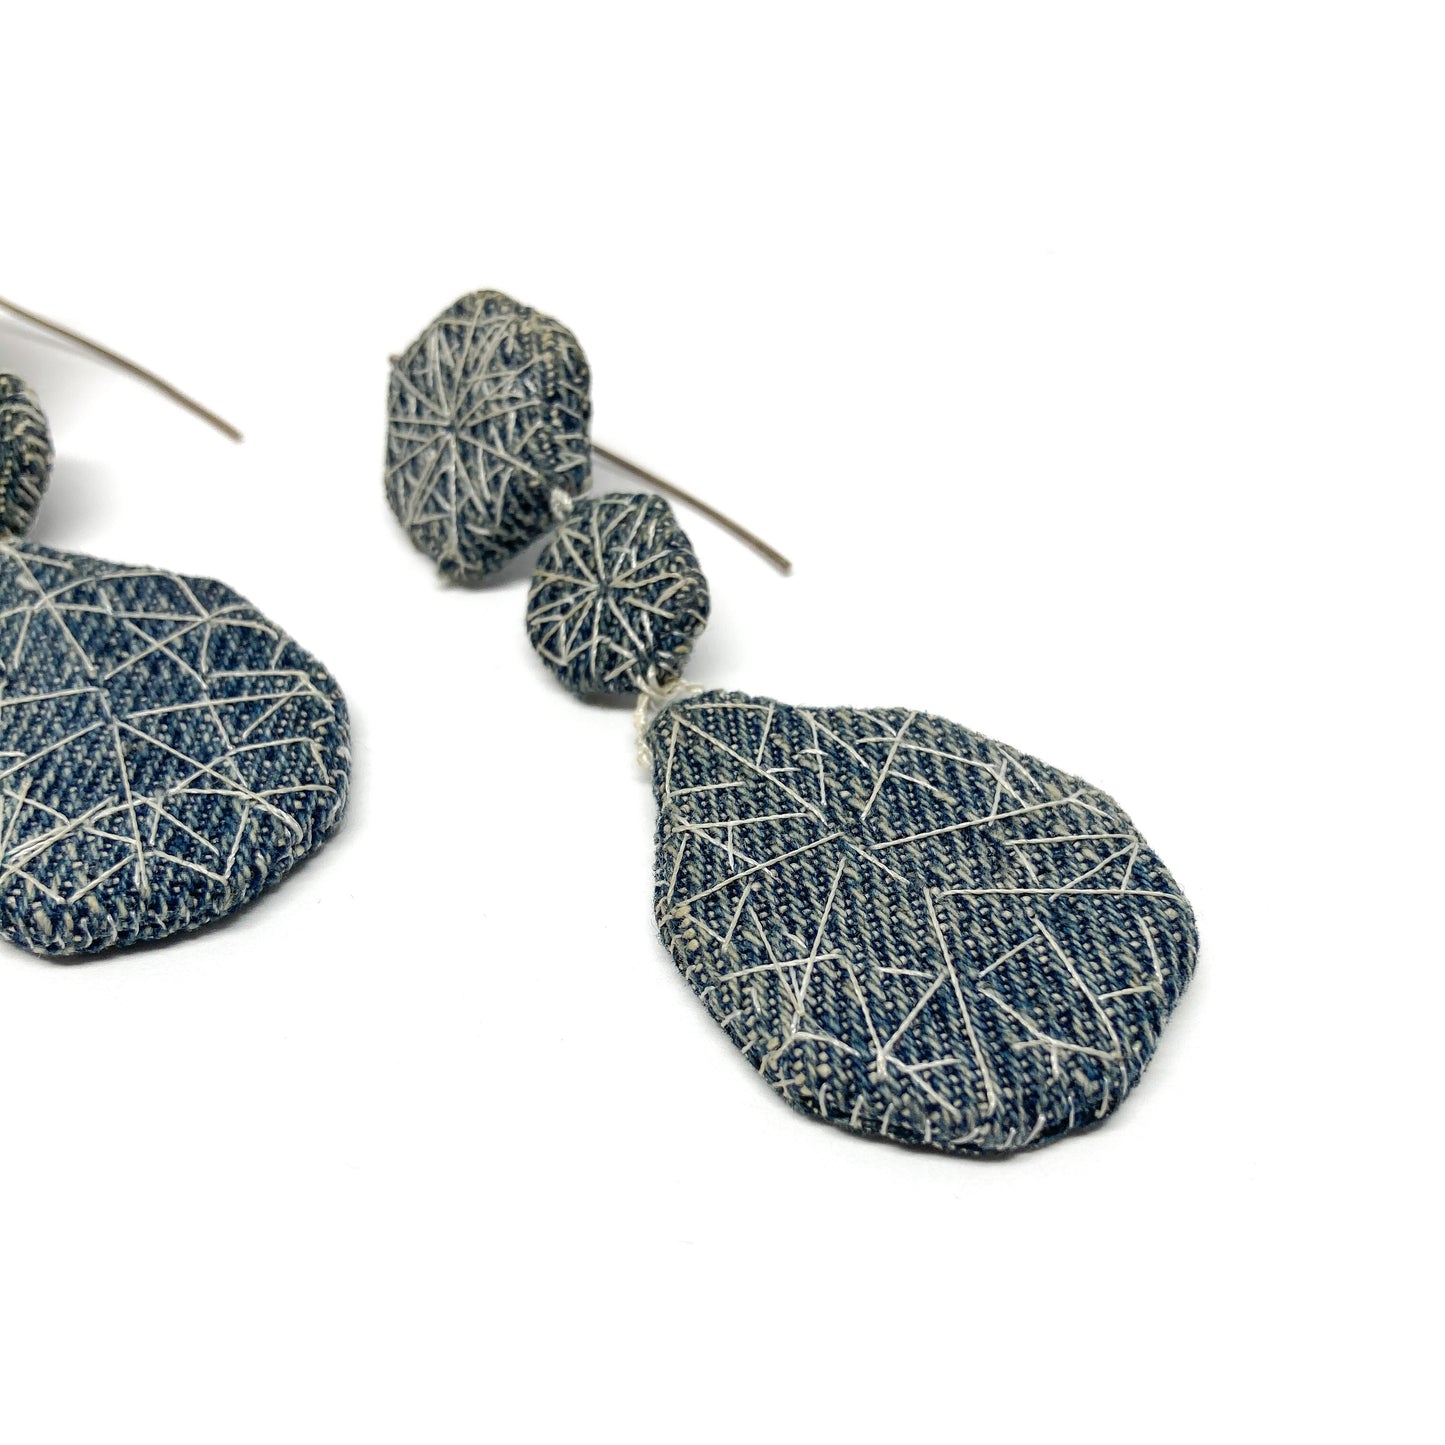 "Patched Coronation (Street)" Earrings